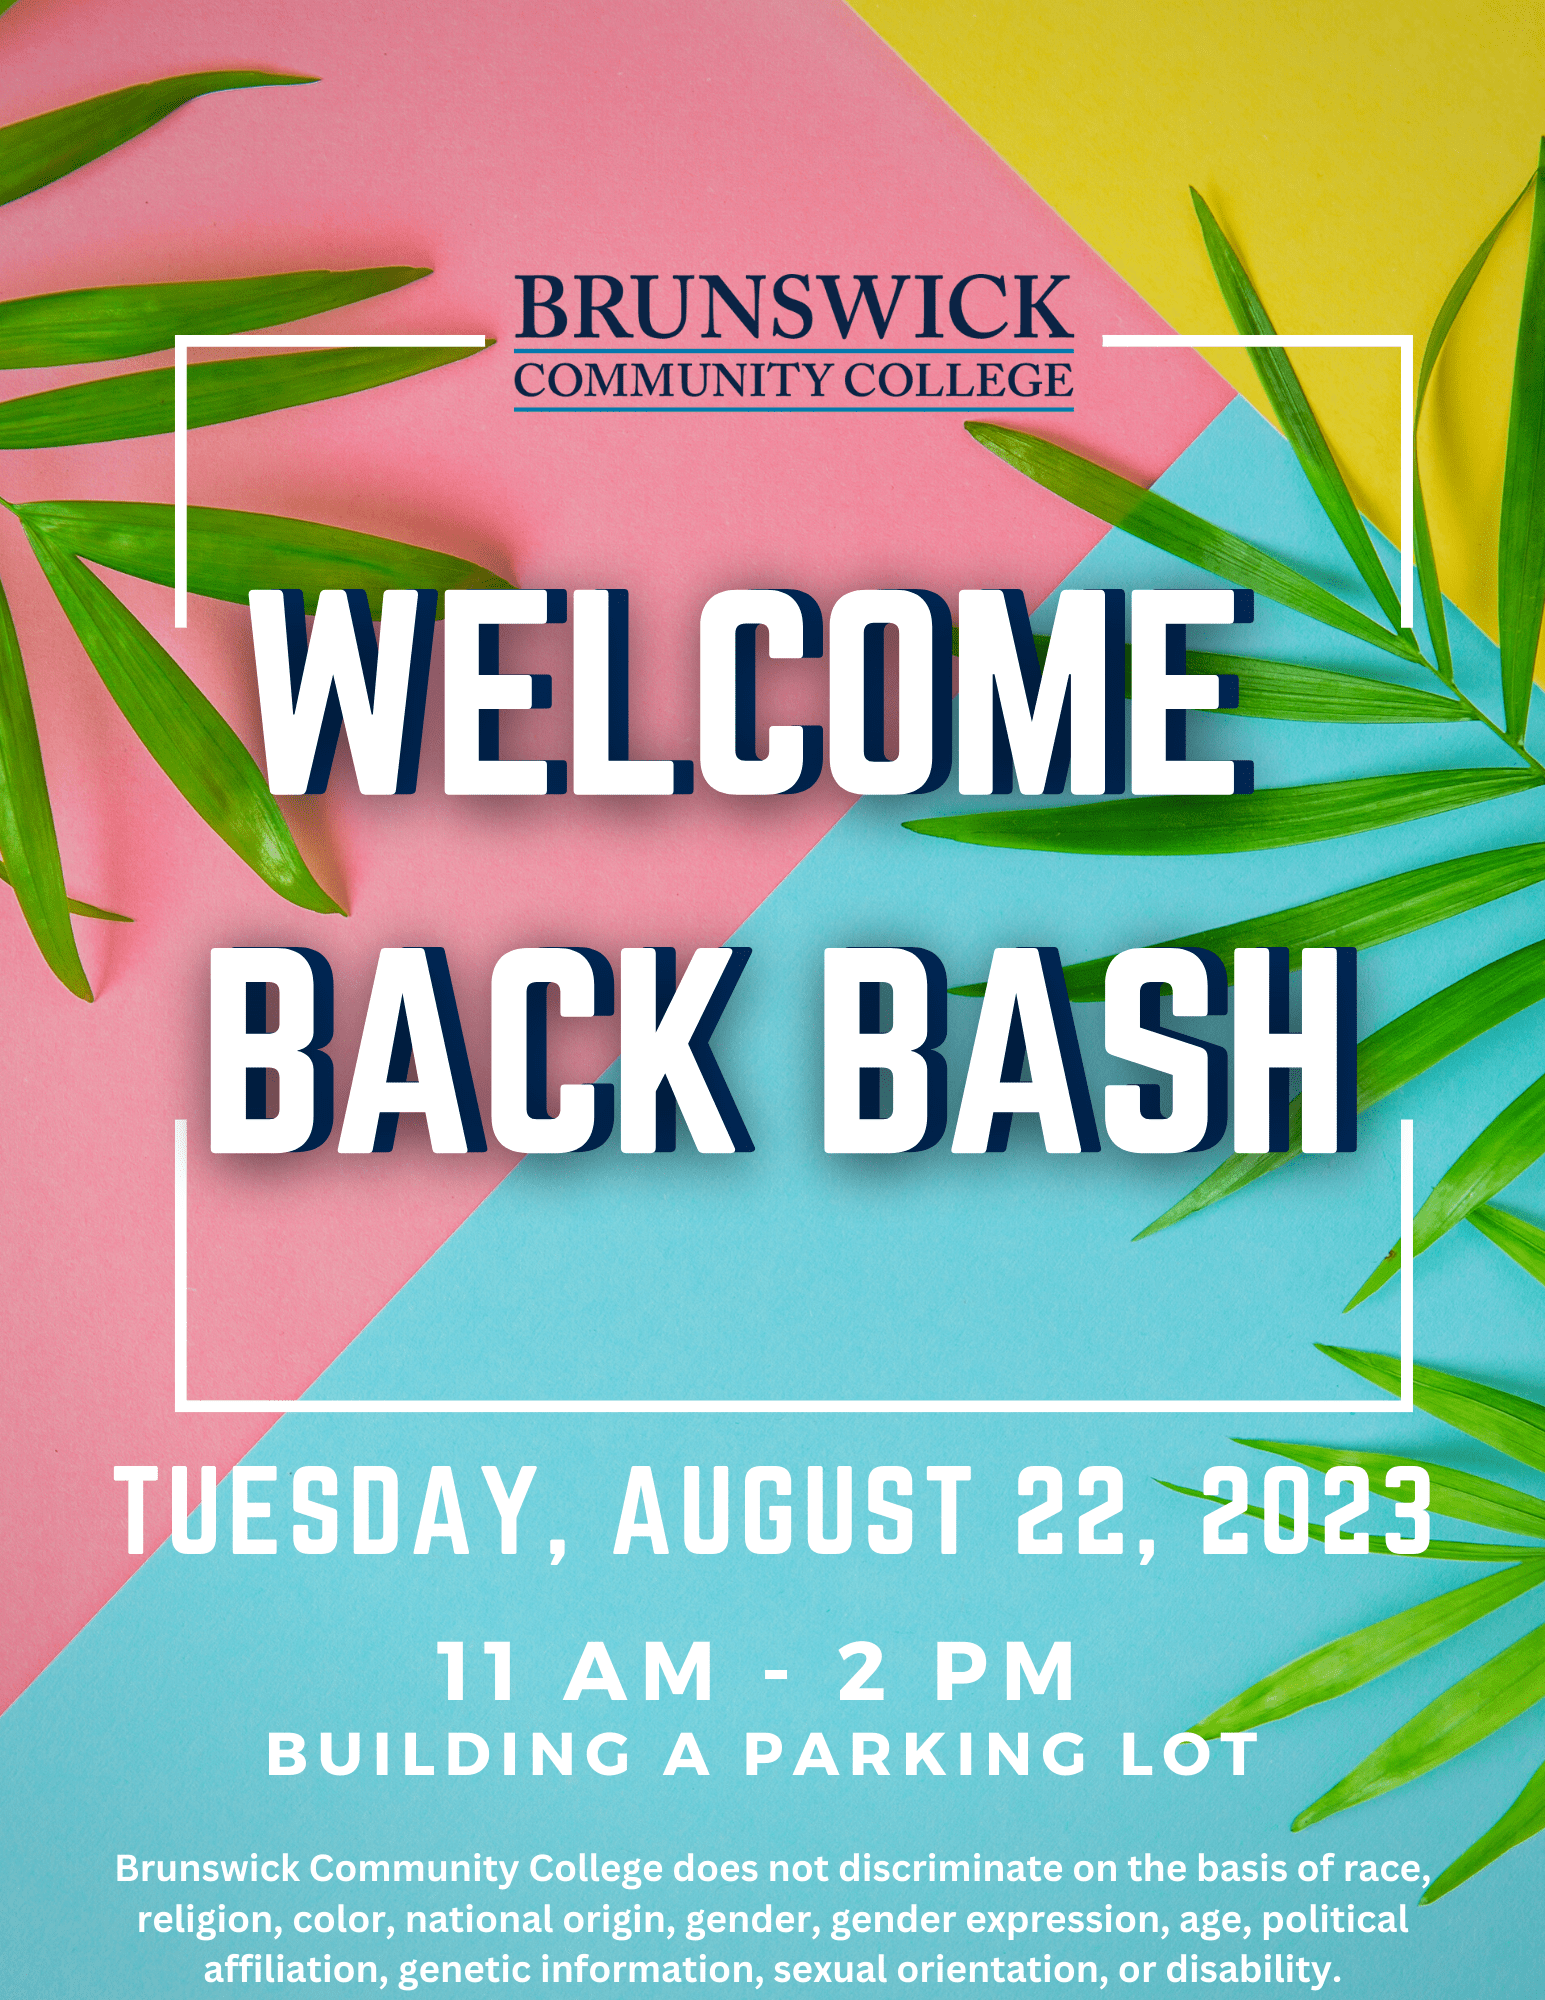 Welcome Back Bash flyer featuring a tropical background